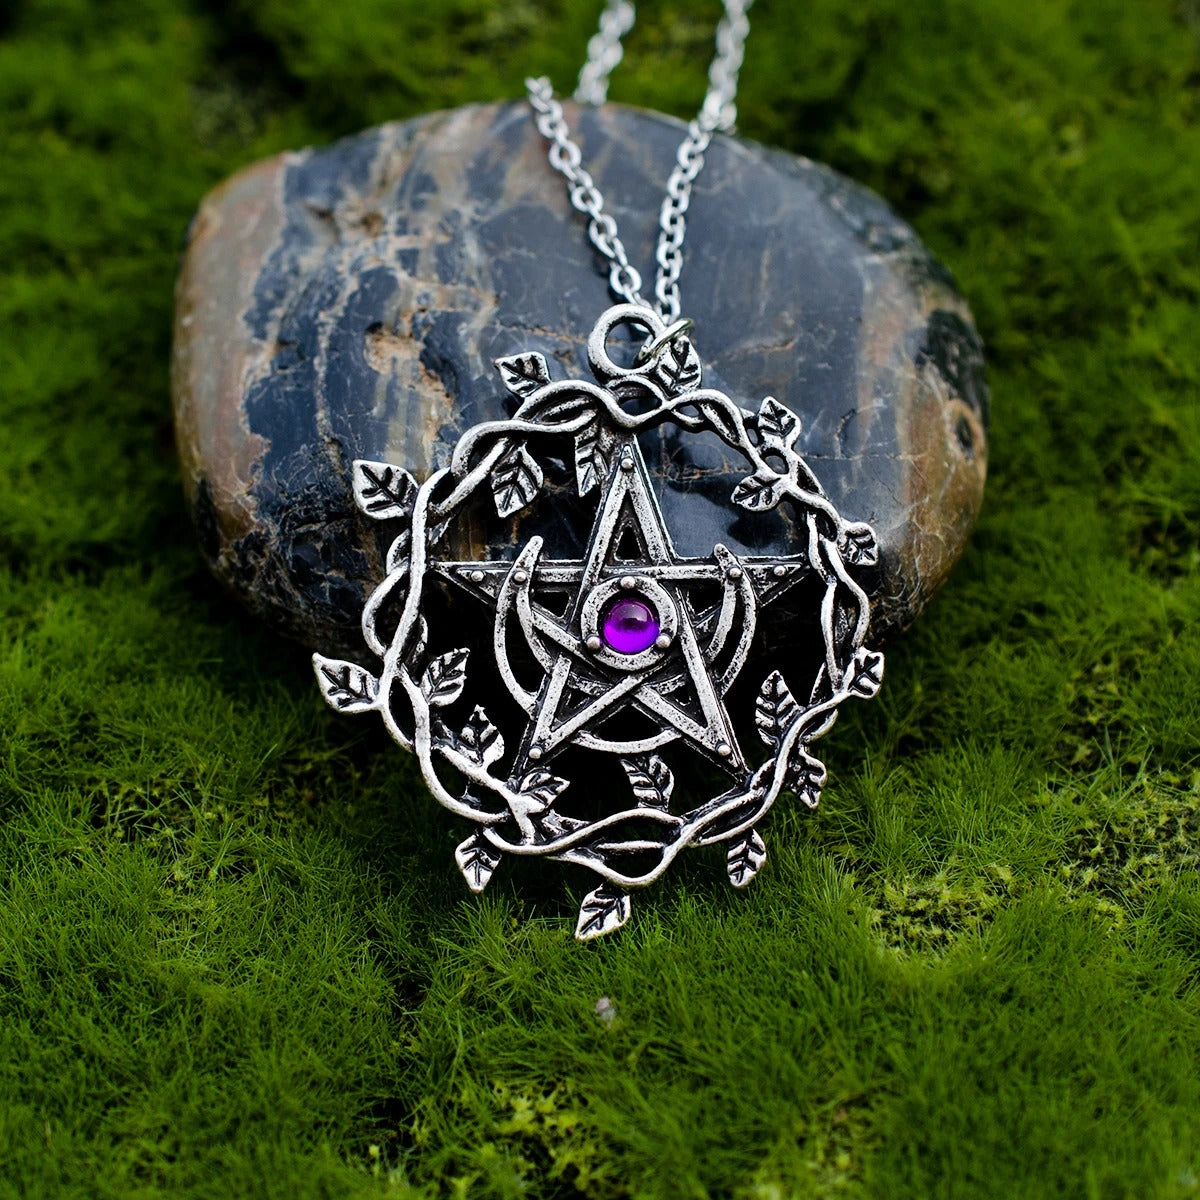 Protective Moonlit Amethyst Pentacle Necklace